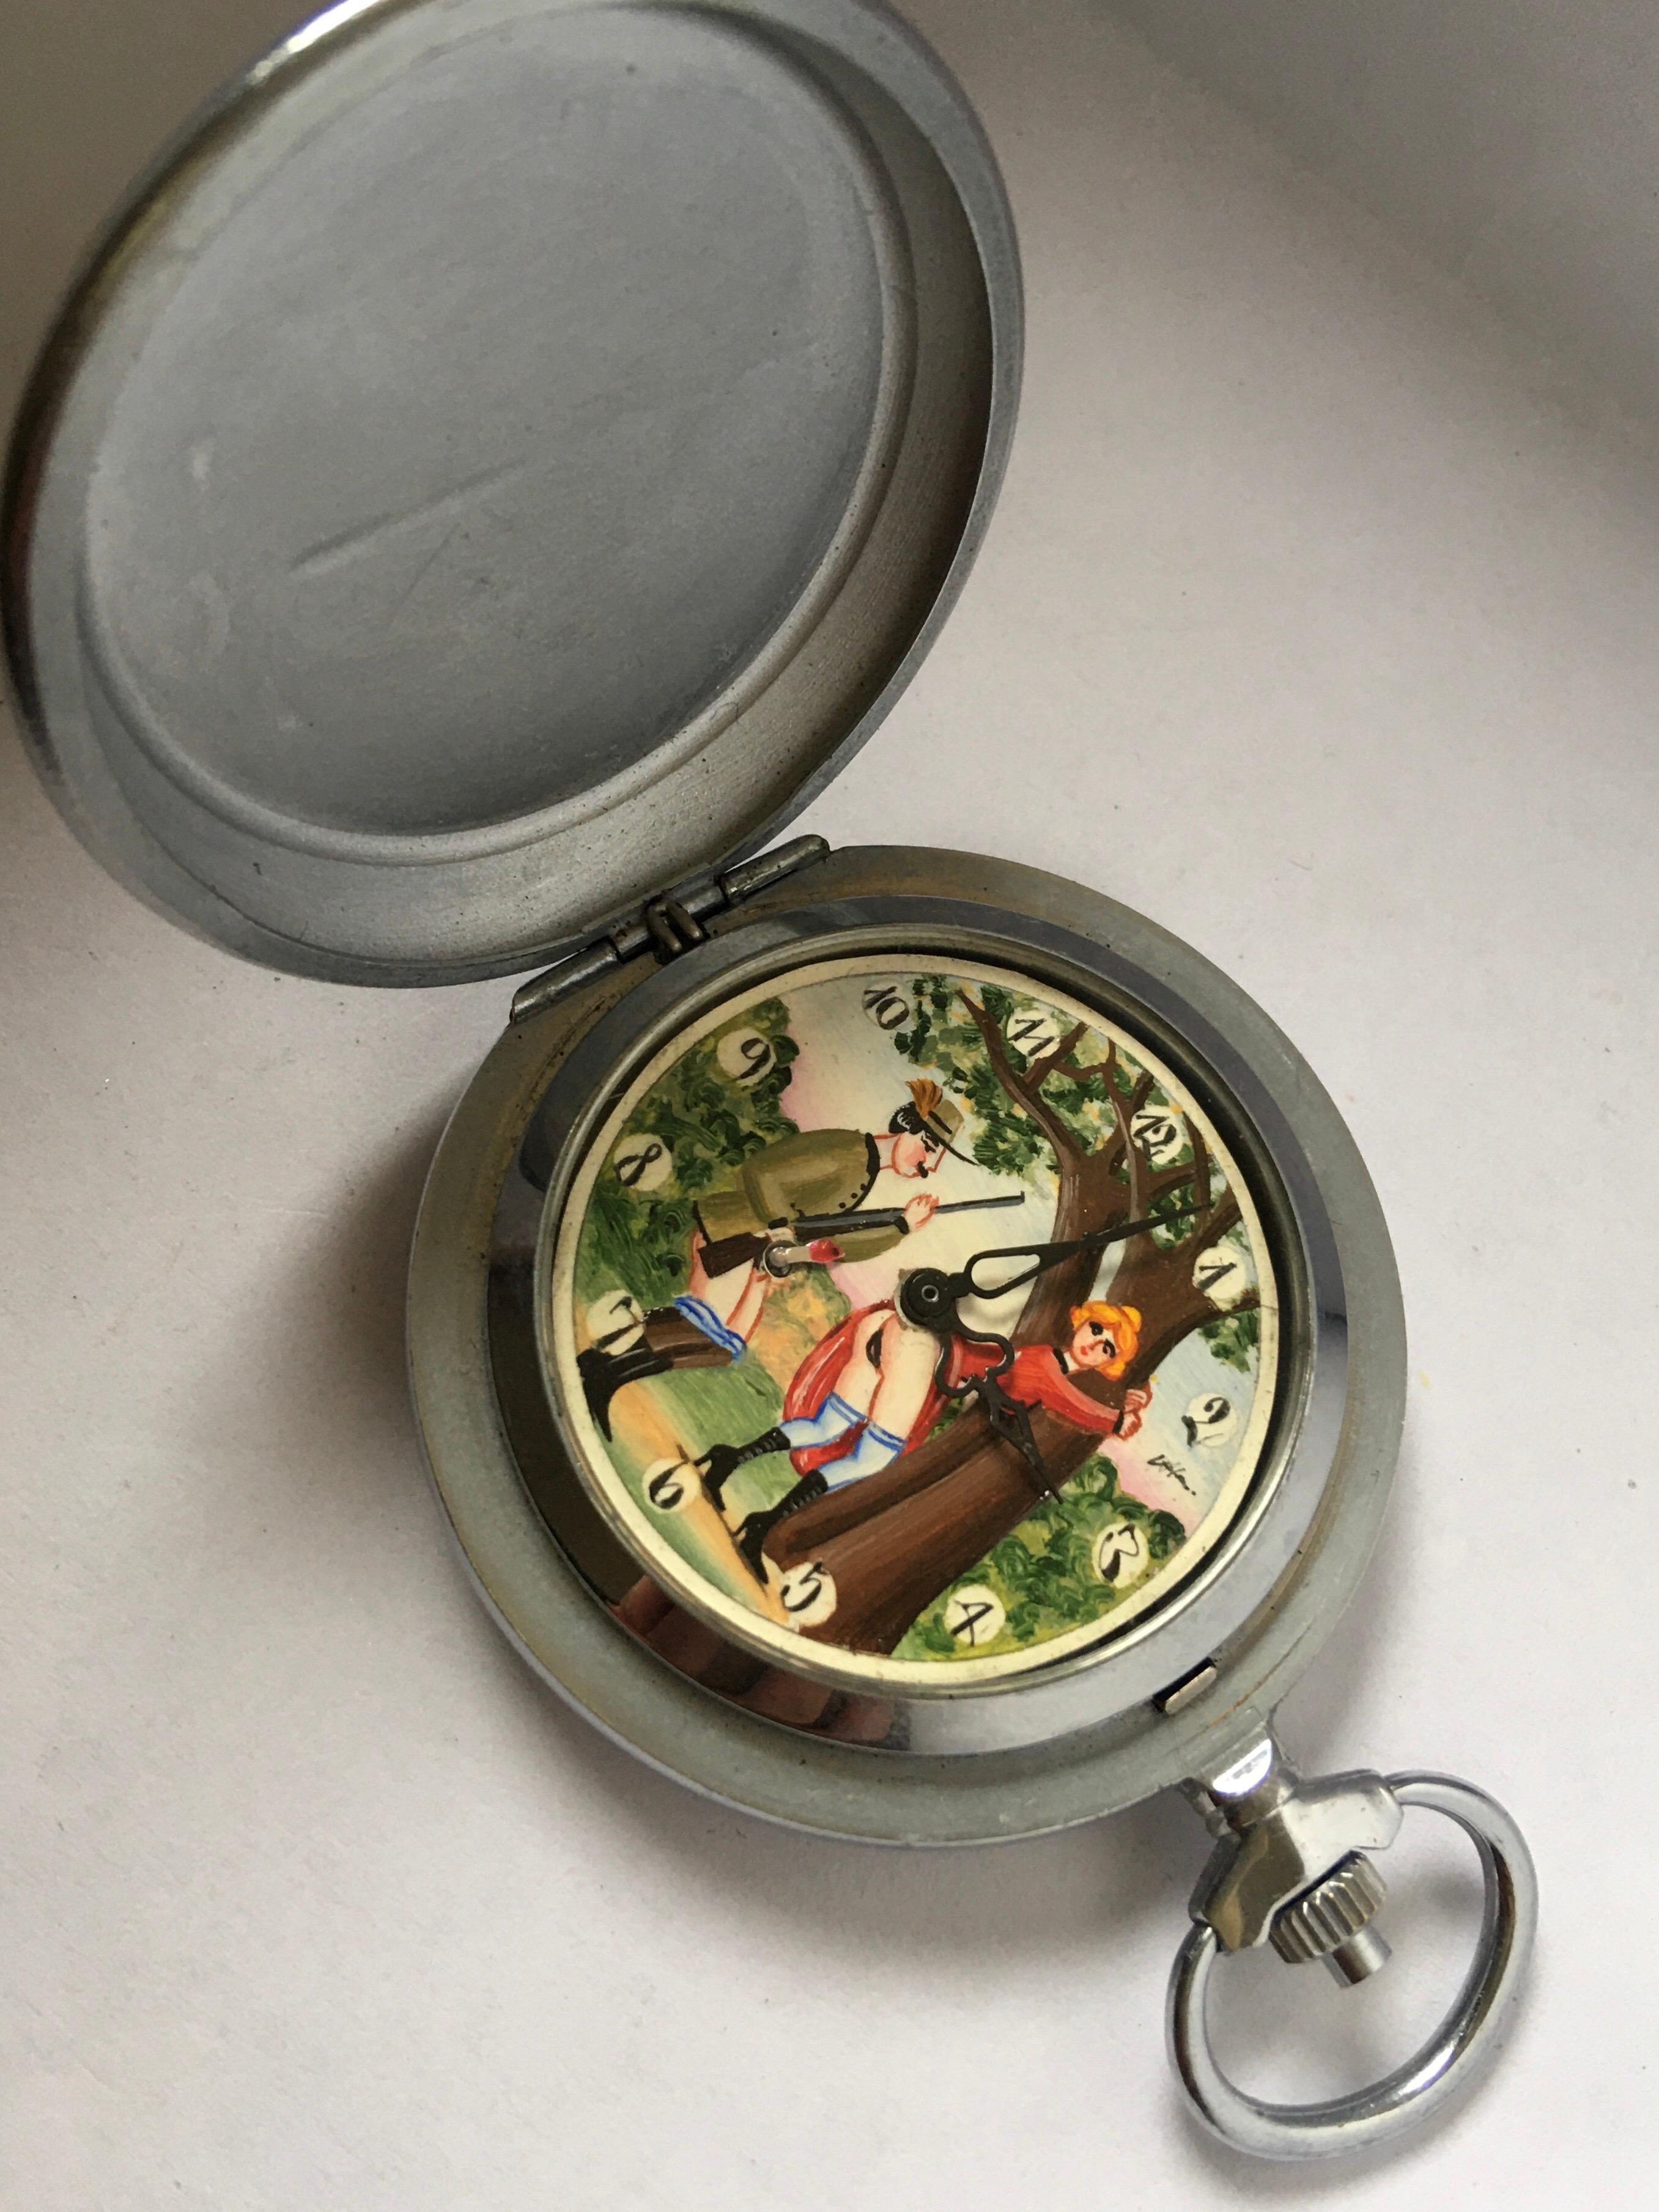 This beautiful vintage hand winding pocket watch is in good working condition and it is ticking and running well. Visible signs of ageing and wear with light scratches on the watch case as shown. The watch case is tarnished as shown. Please study